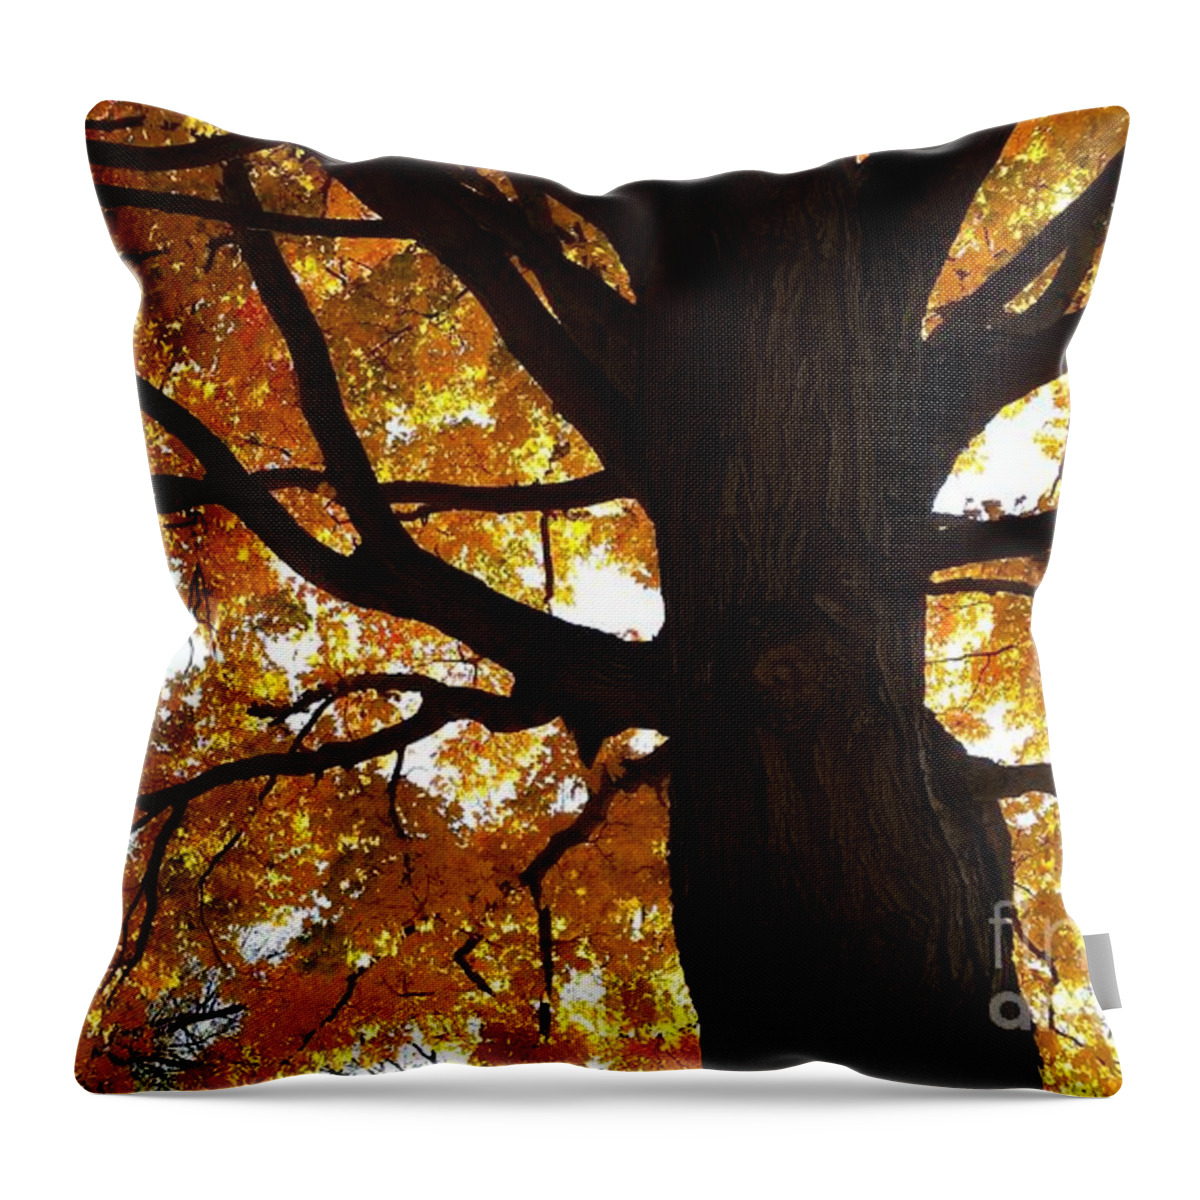 Maple At Griggs Throw Pillow featuring the photograph Maple At Griggs by Paddy Shaffer